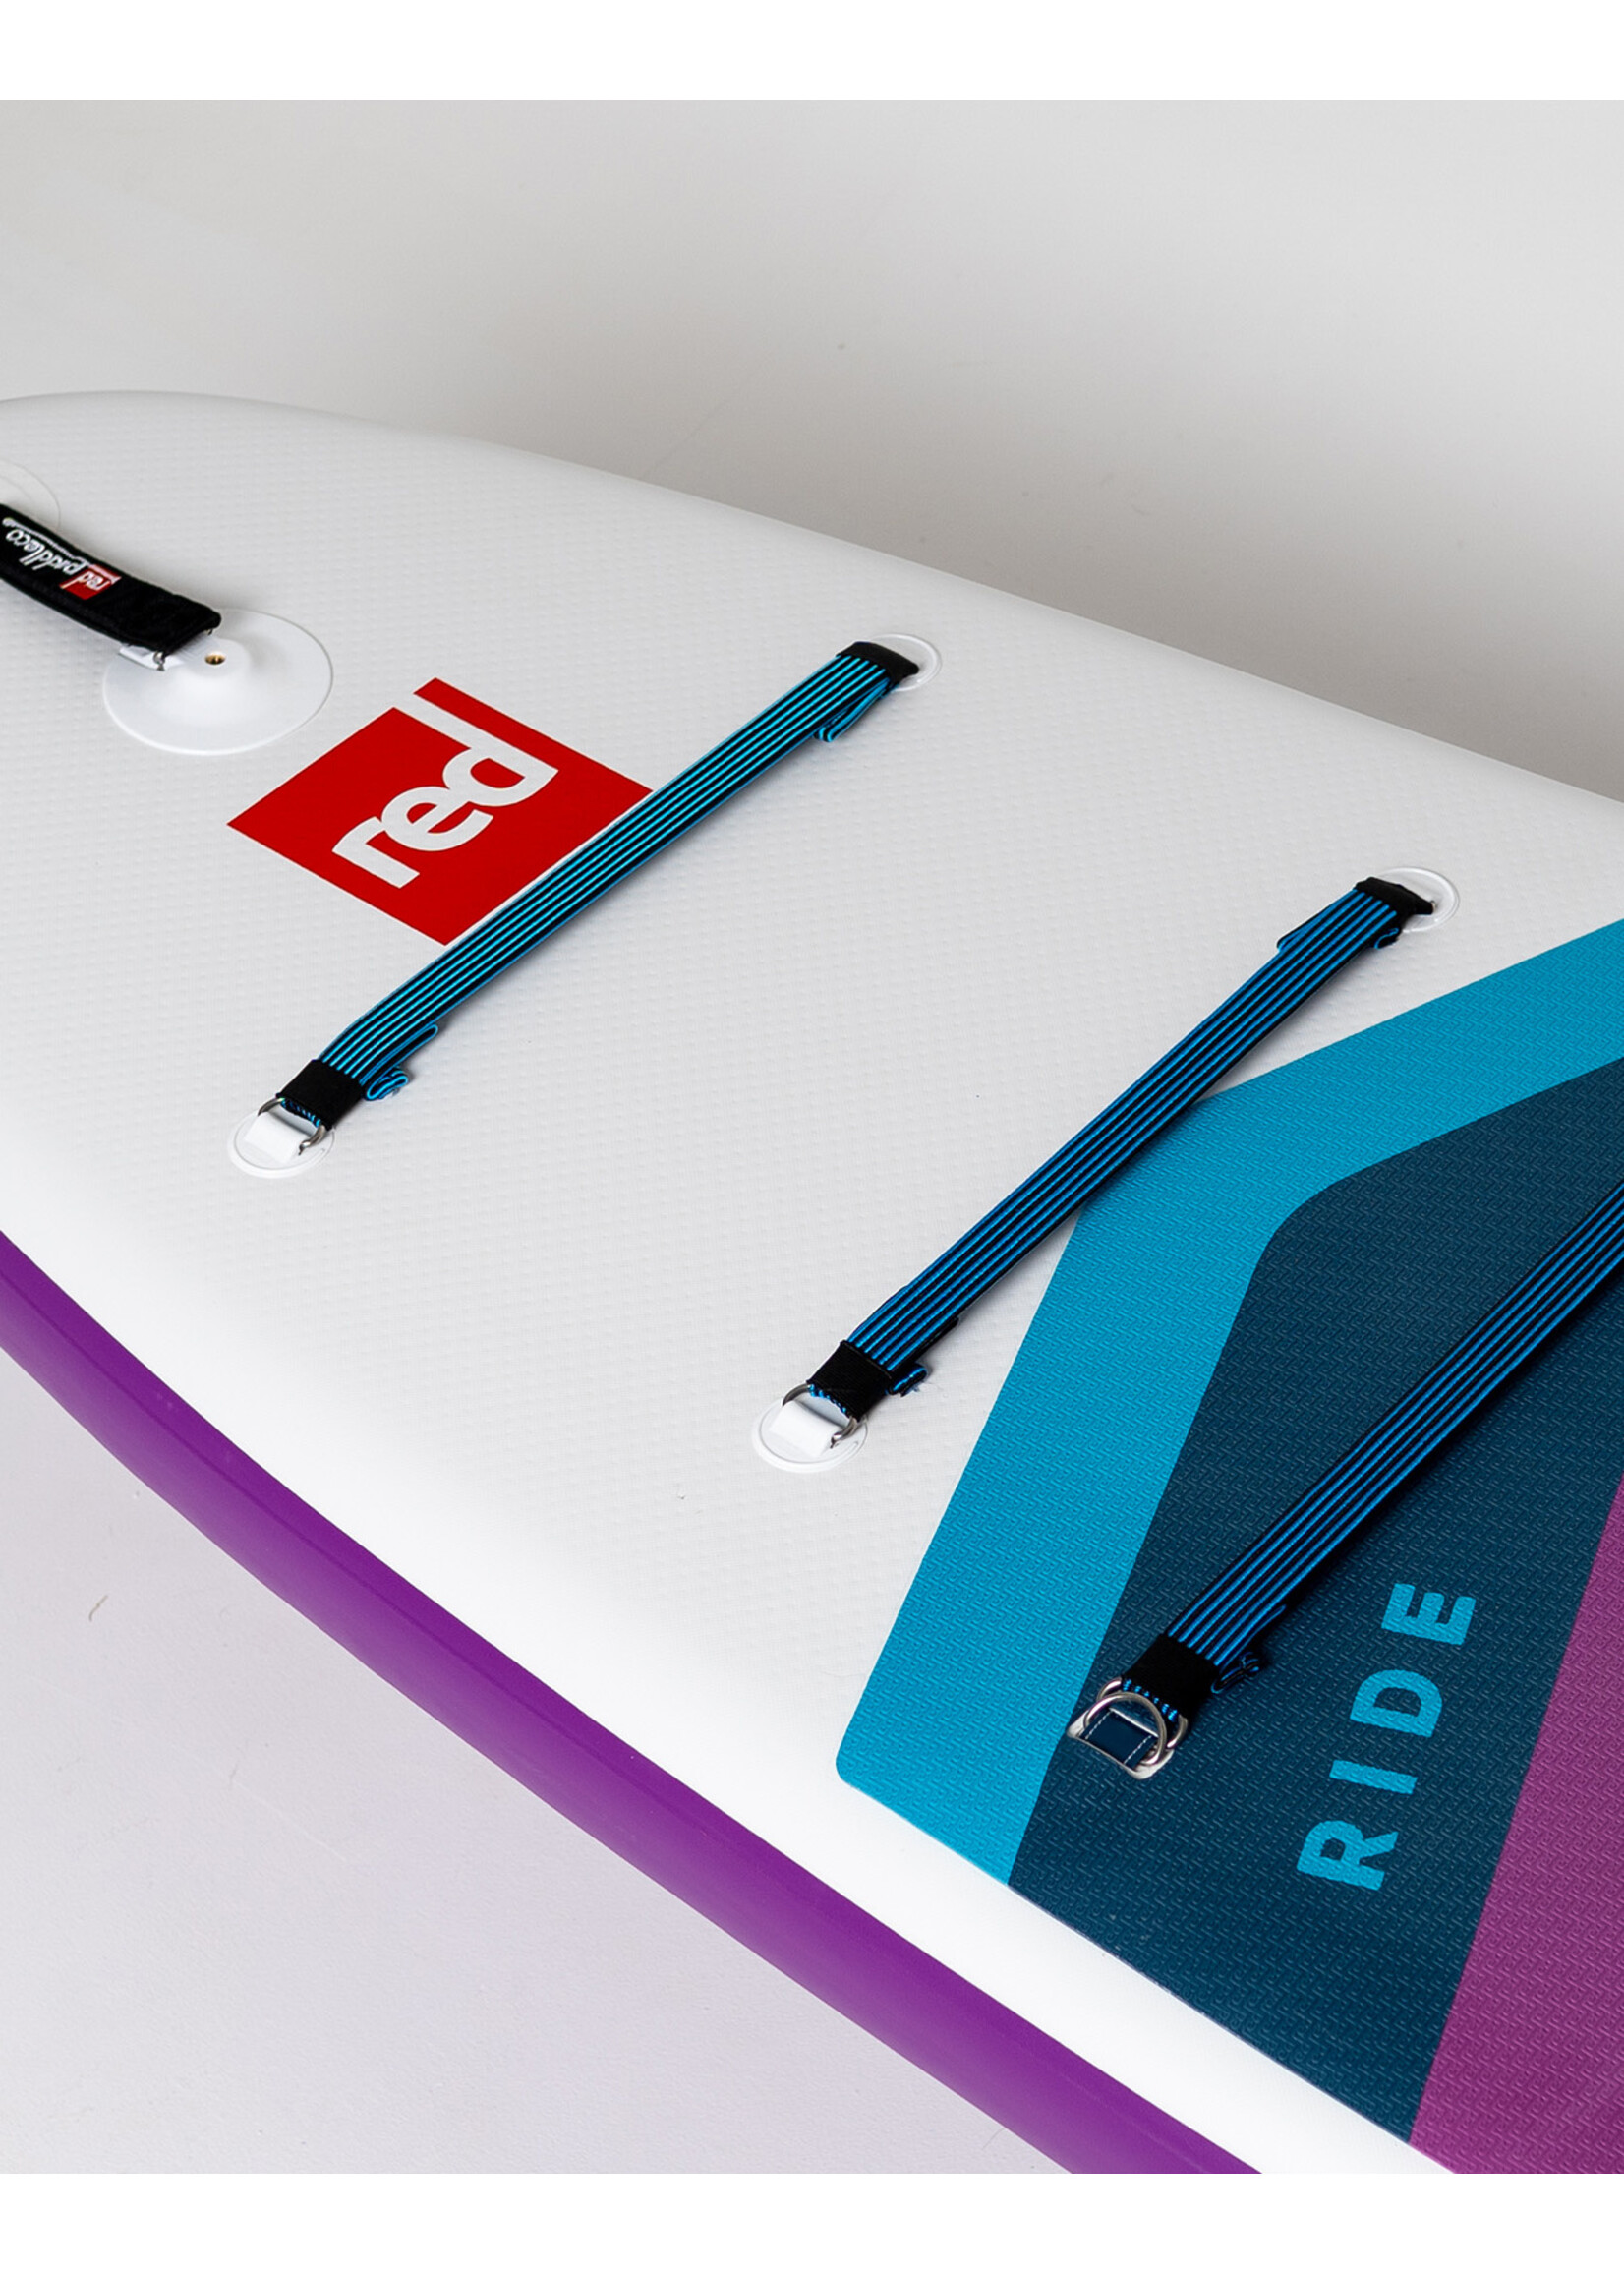 RED 10'6 RIDE CT PURPLE PACKAGE